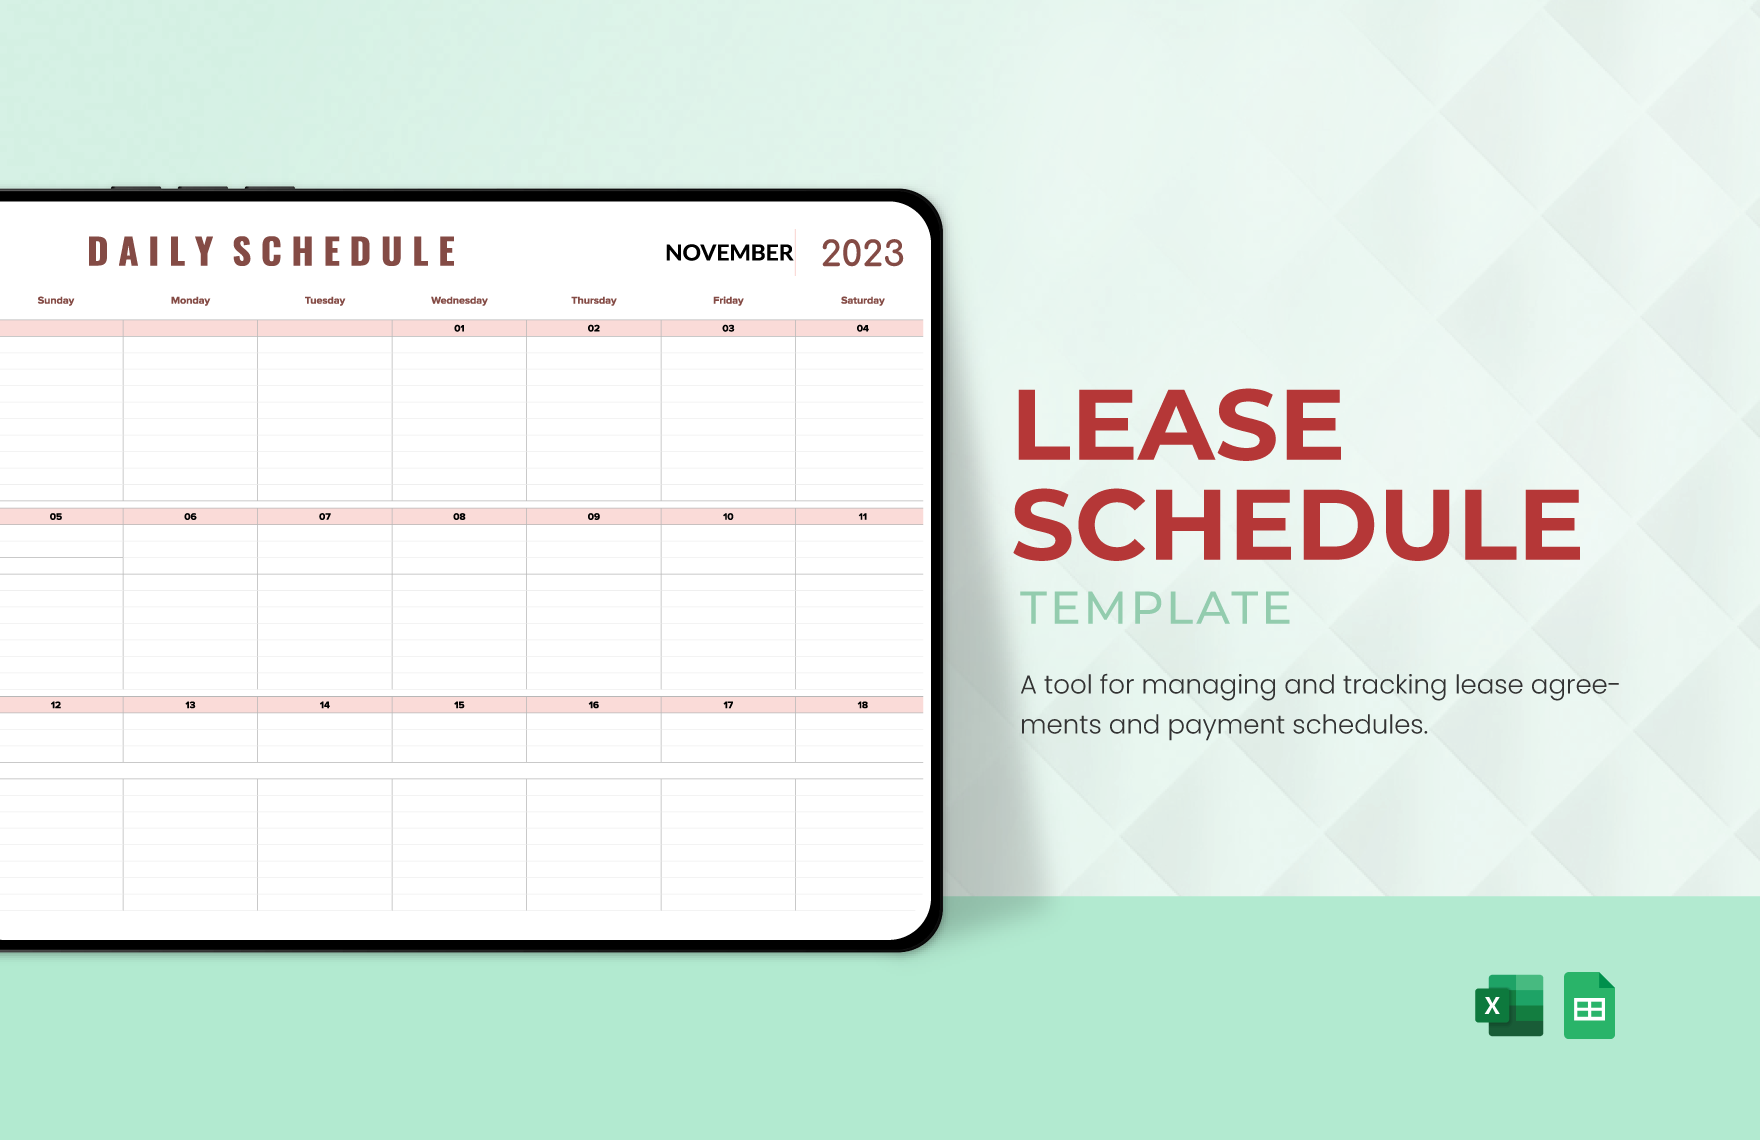 Lease Schedule Template in Excel, Google Sheets